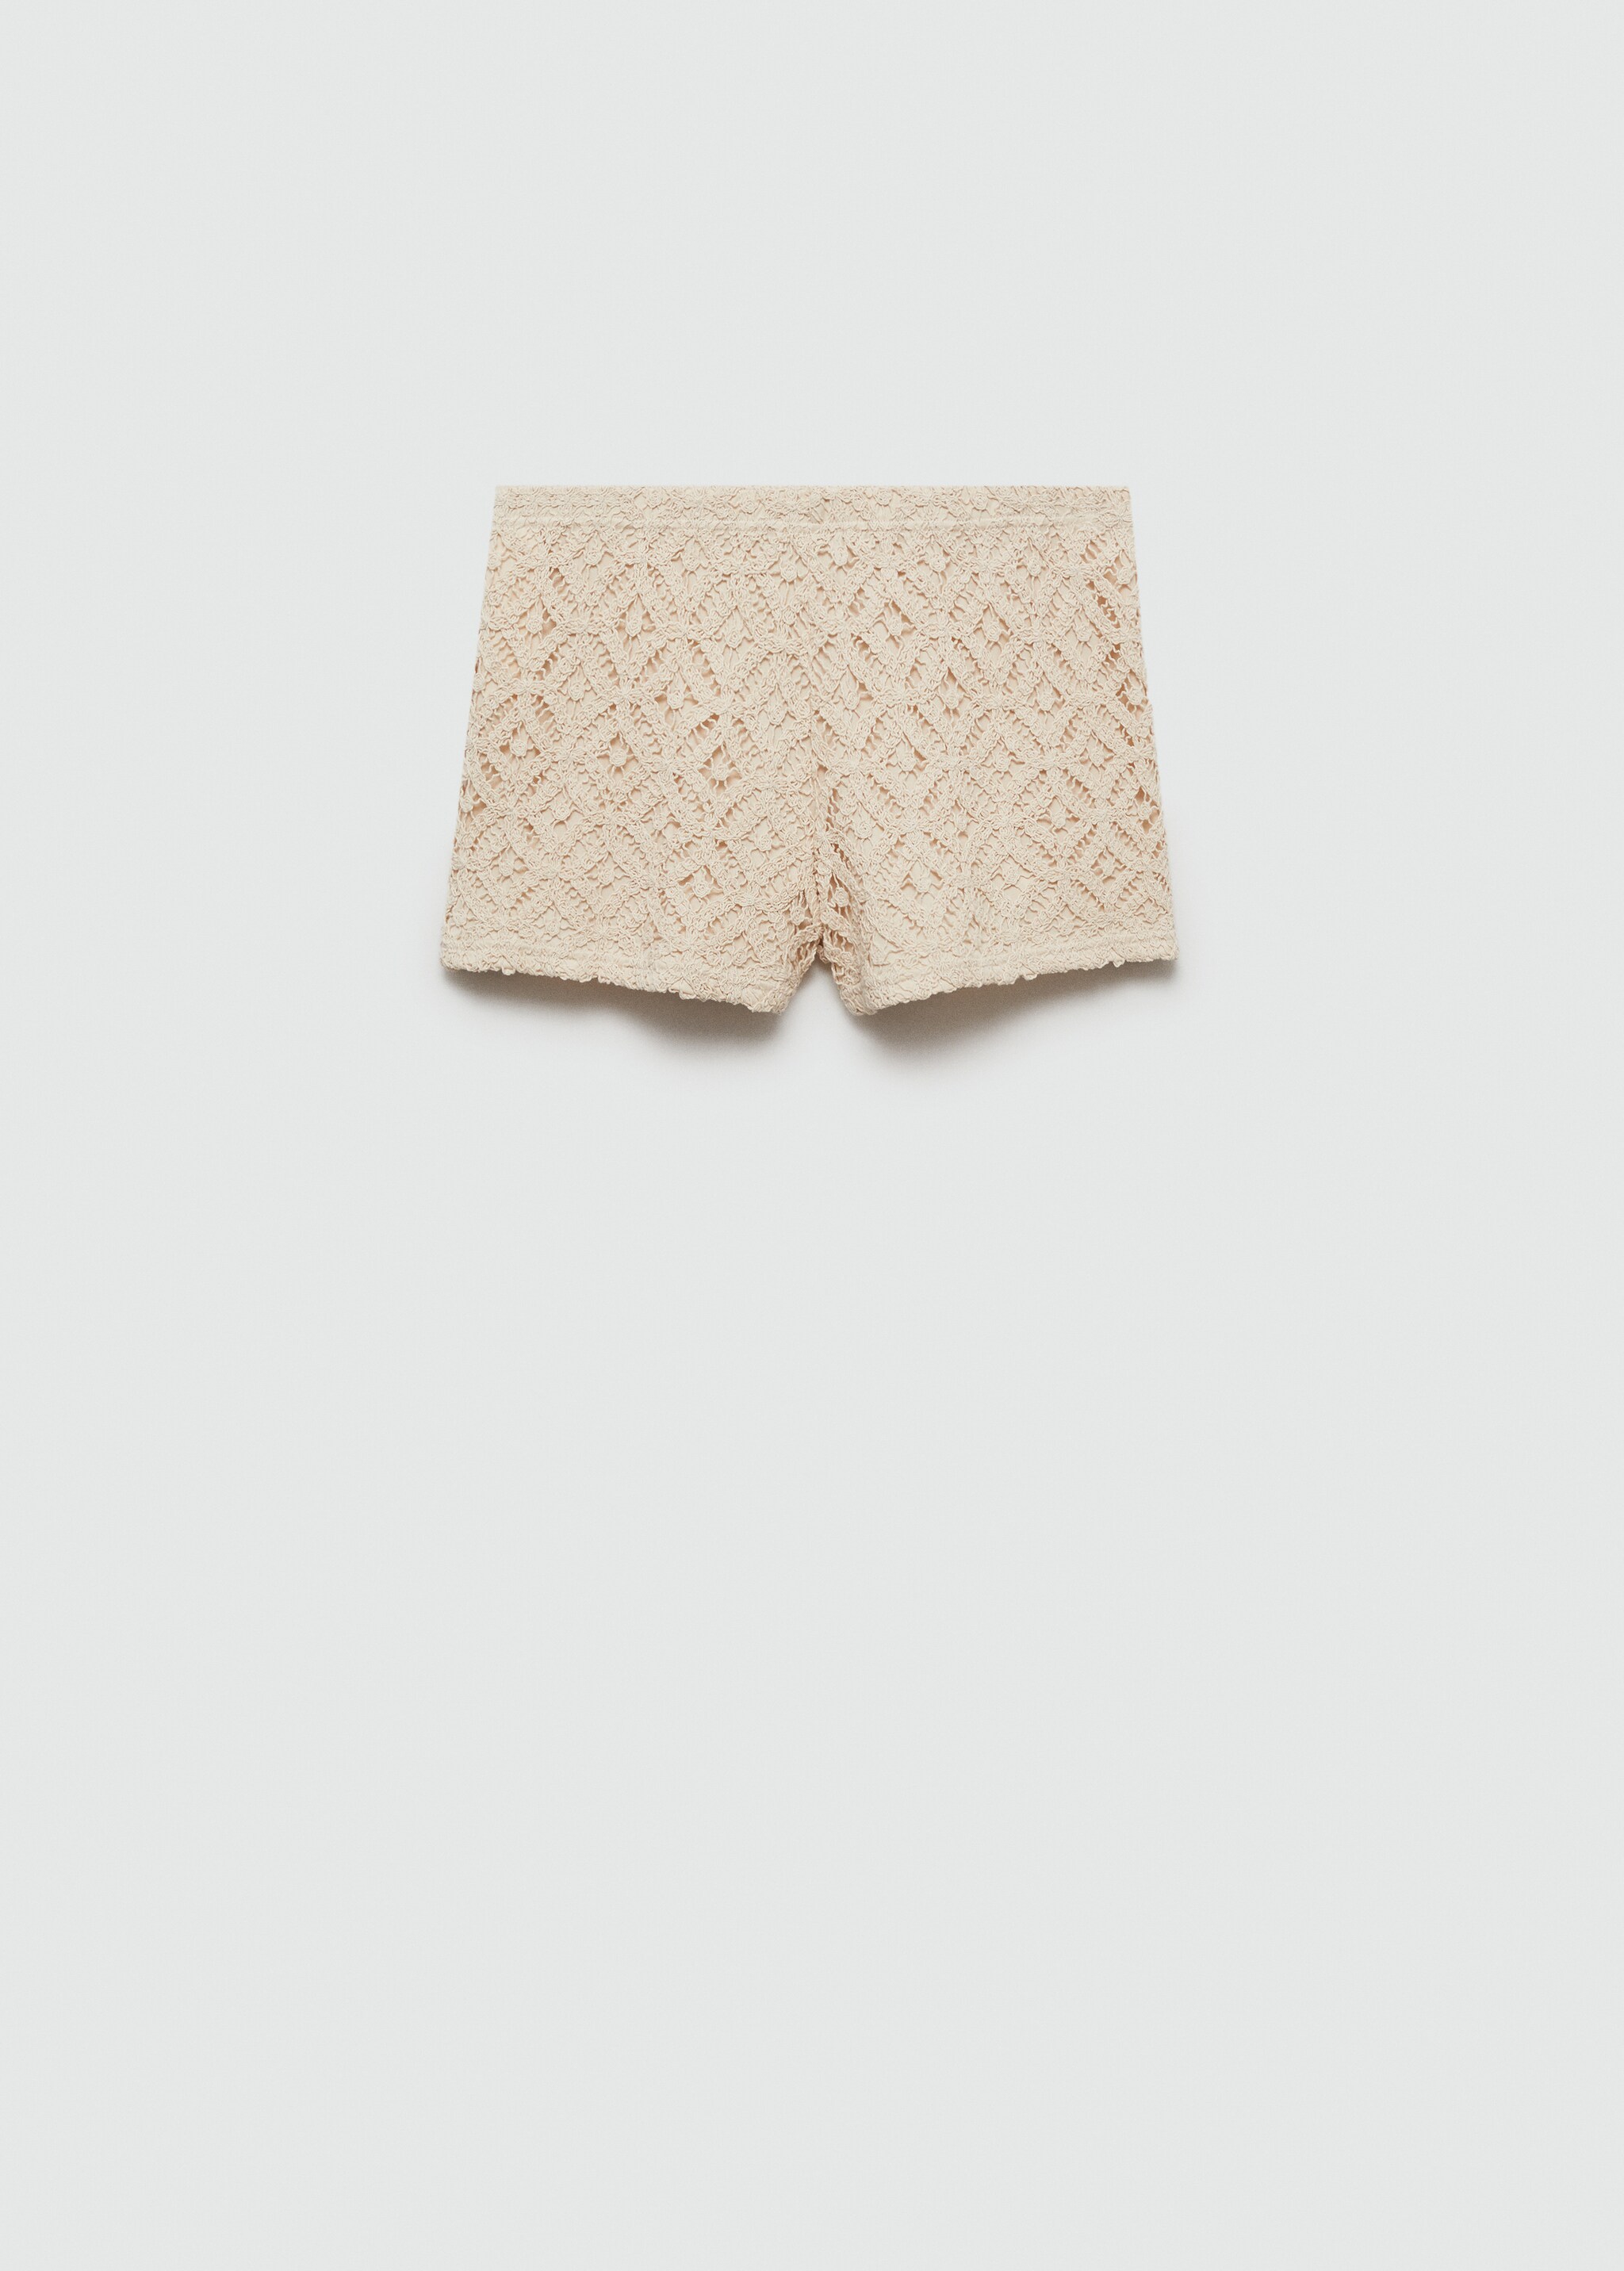 Crochet straight shorts - Article without model